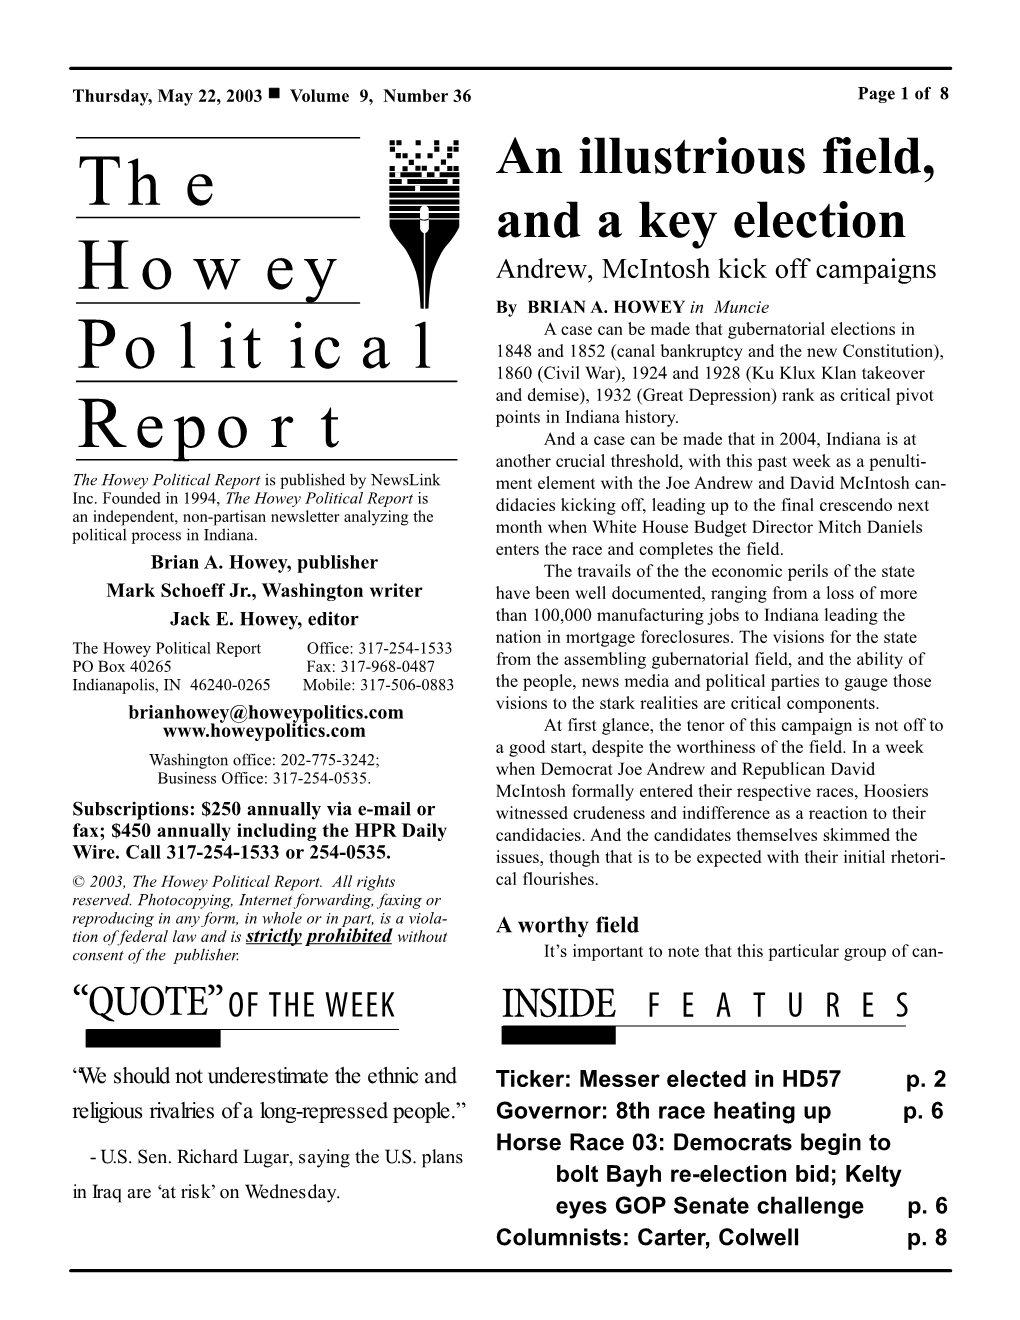 The Howey Political Report Is Published by Newslink Ment Element with the Joe Andrew and David Mcintosh Can- Inc